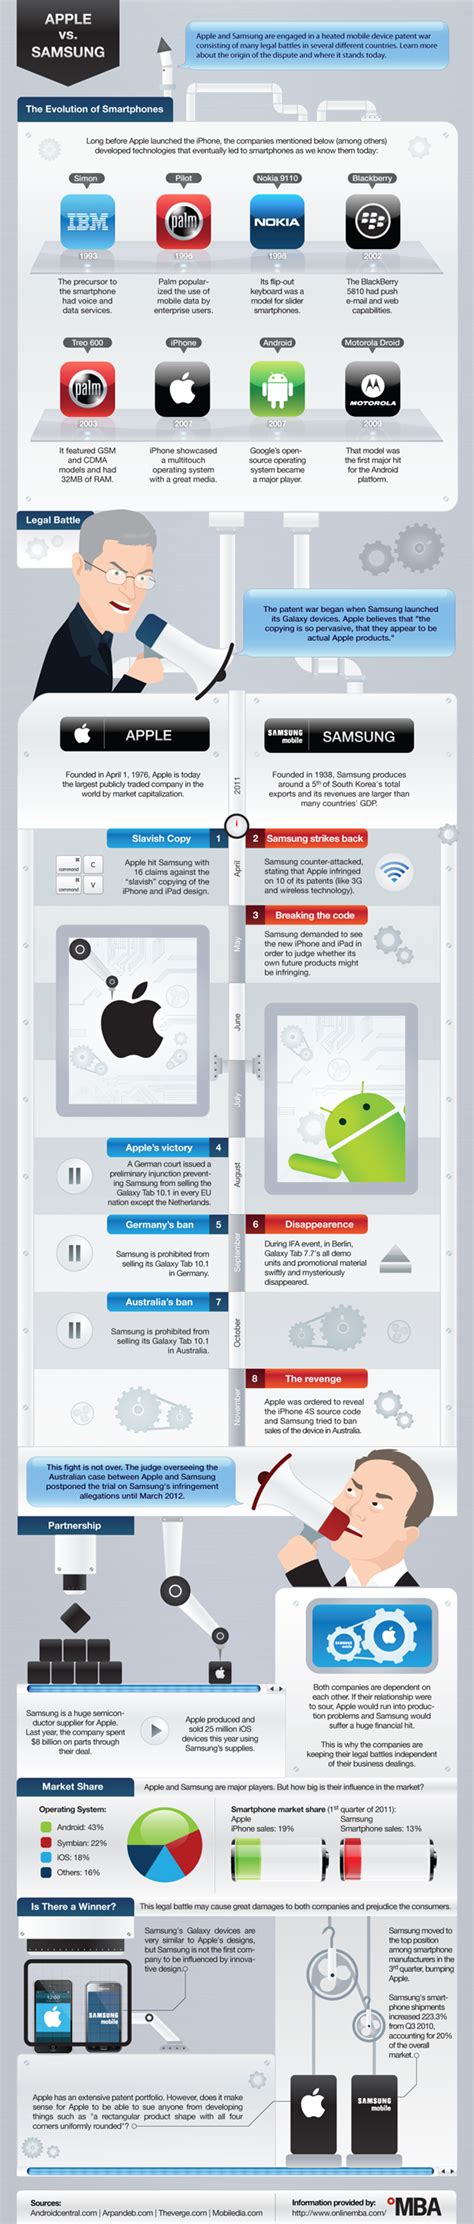 This Infographic Explains The Patent War Between Apple And Samsung